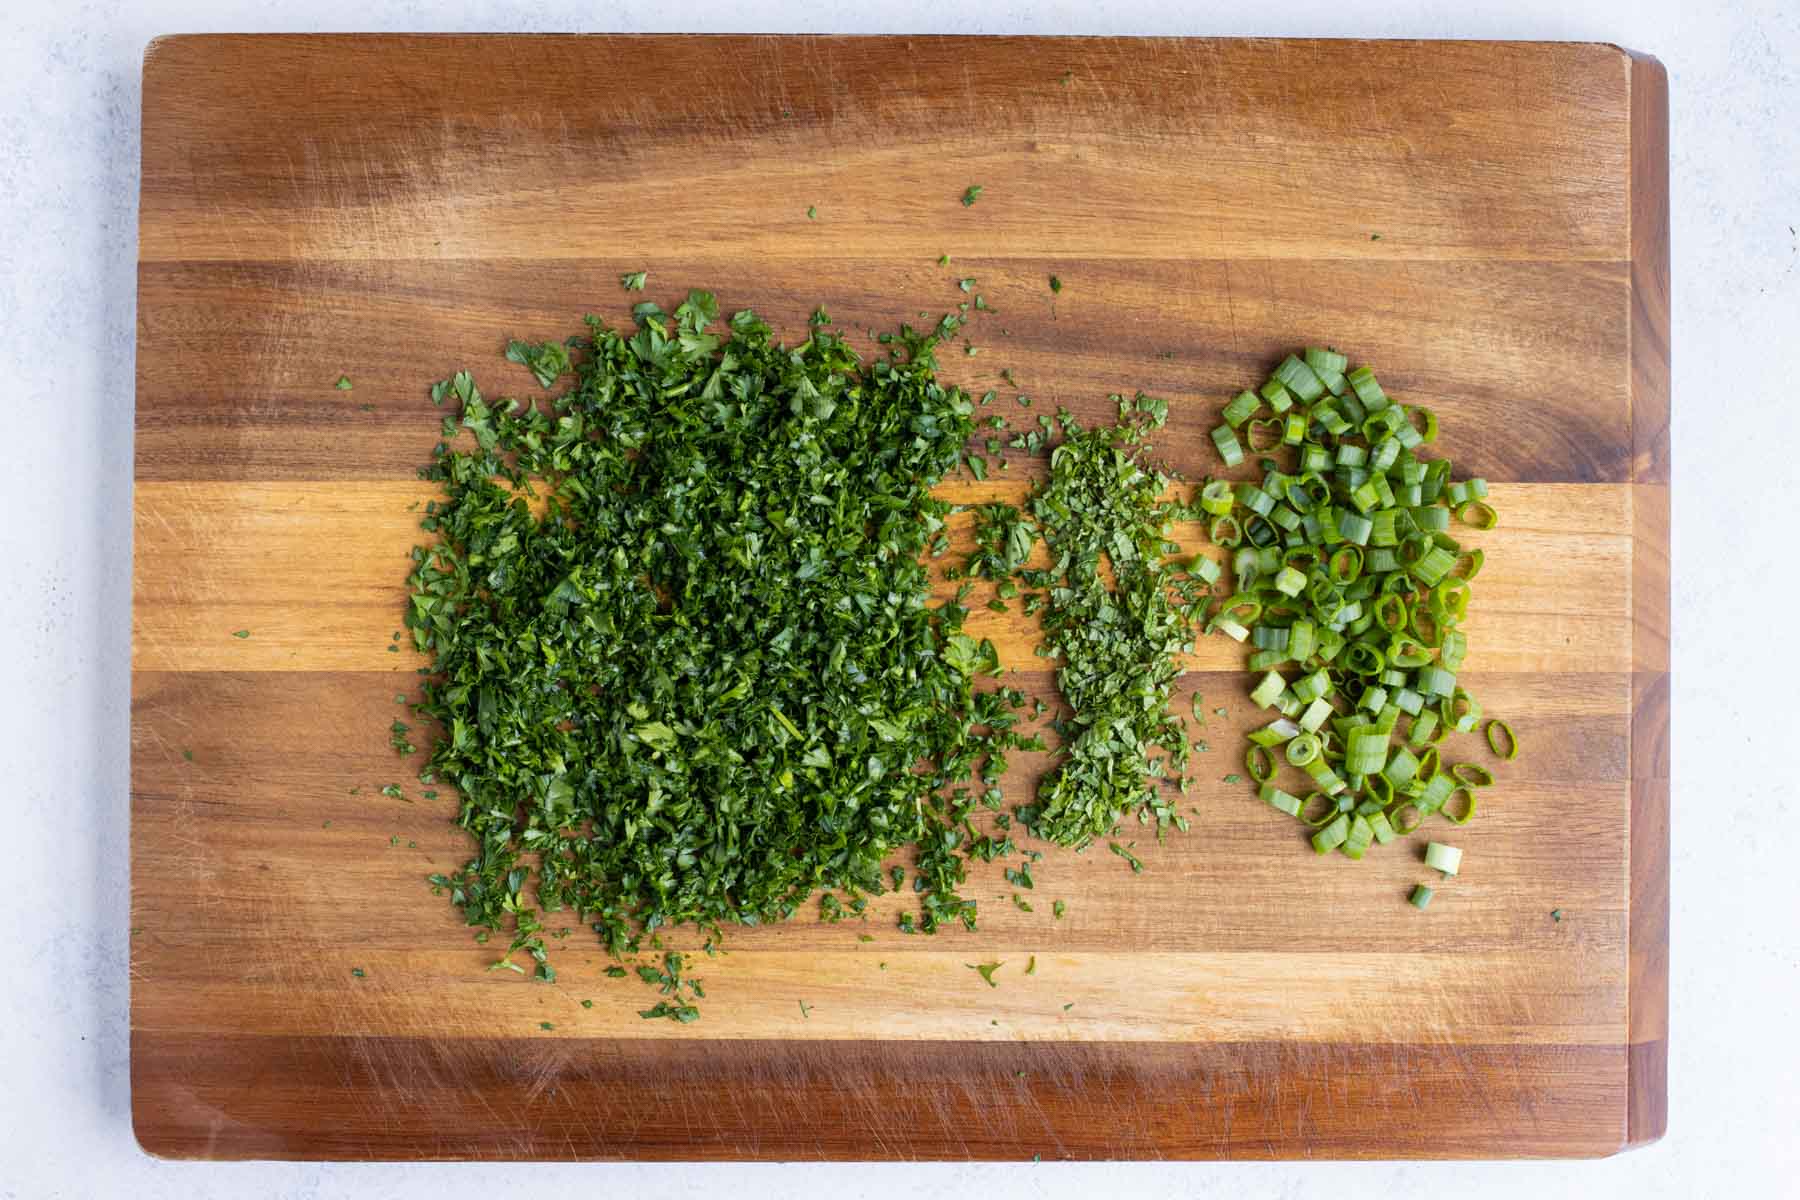 Parsley, green onions, and fresh mint are chopped on a cutting board.